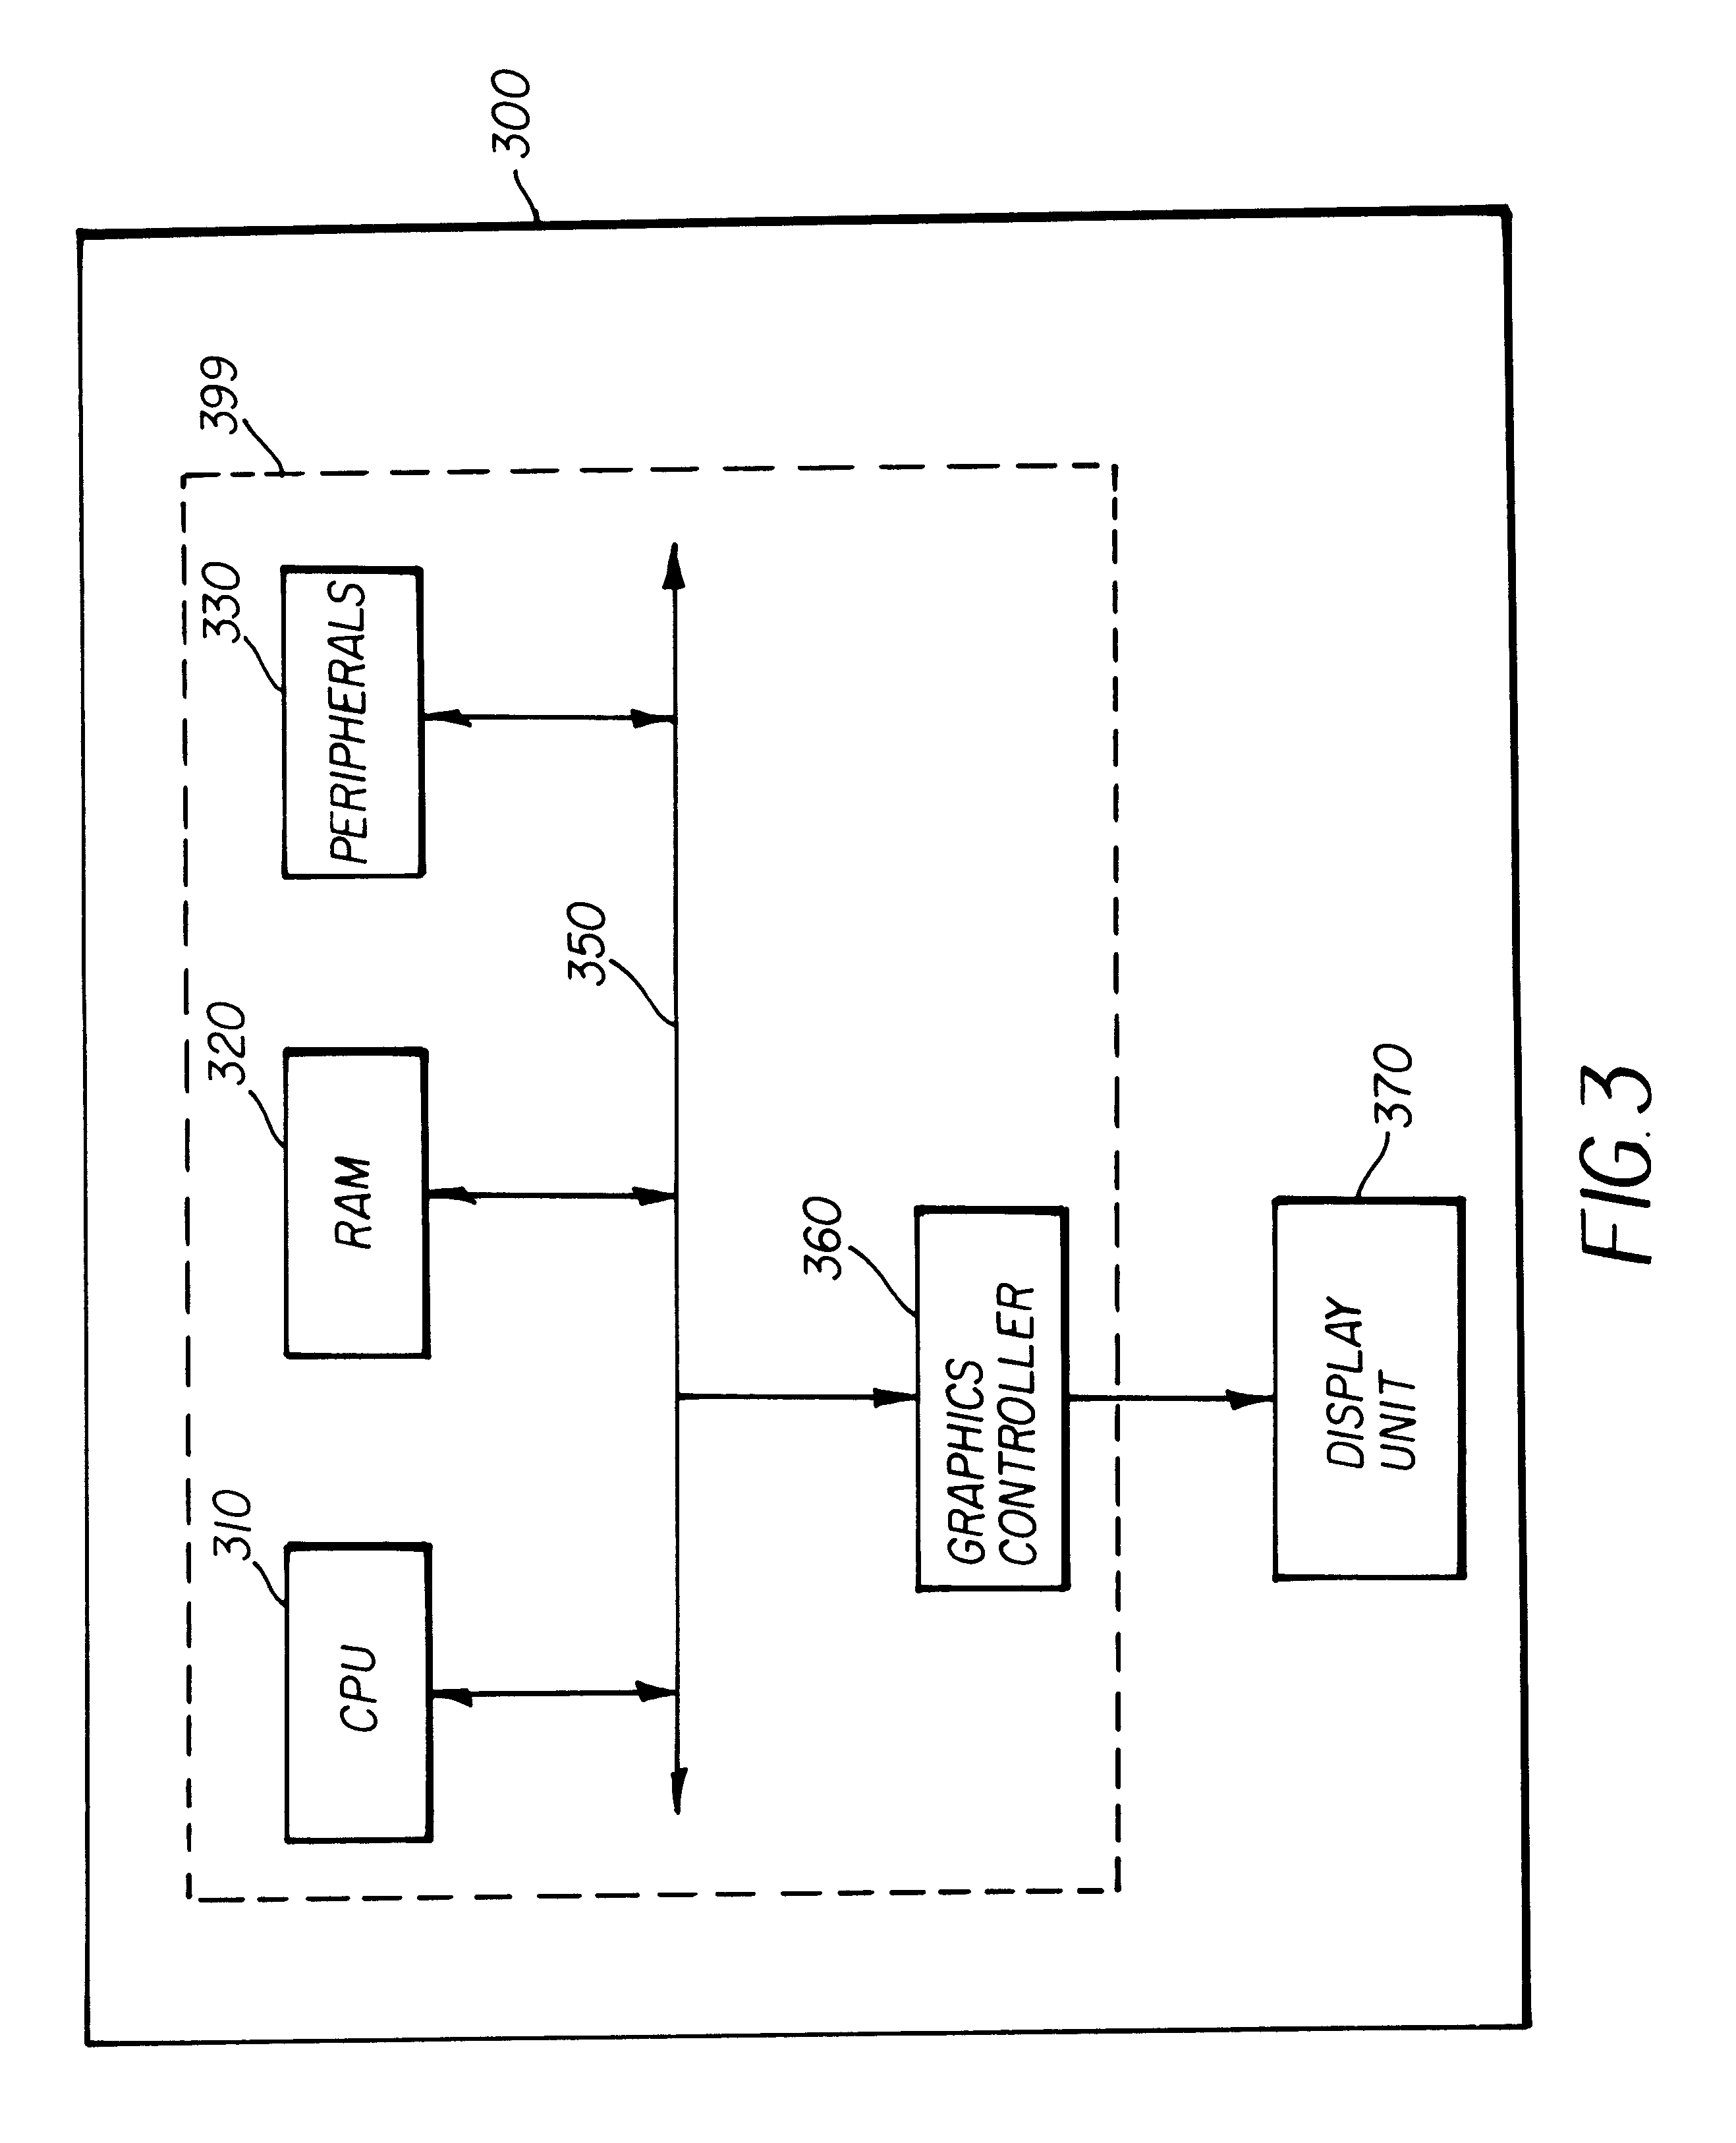 Method and apparatus implemented in an automatic sampling phase control system for digital monitors